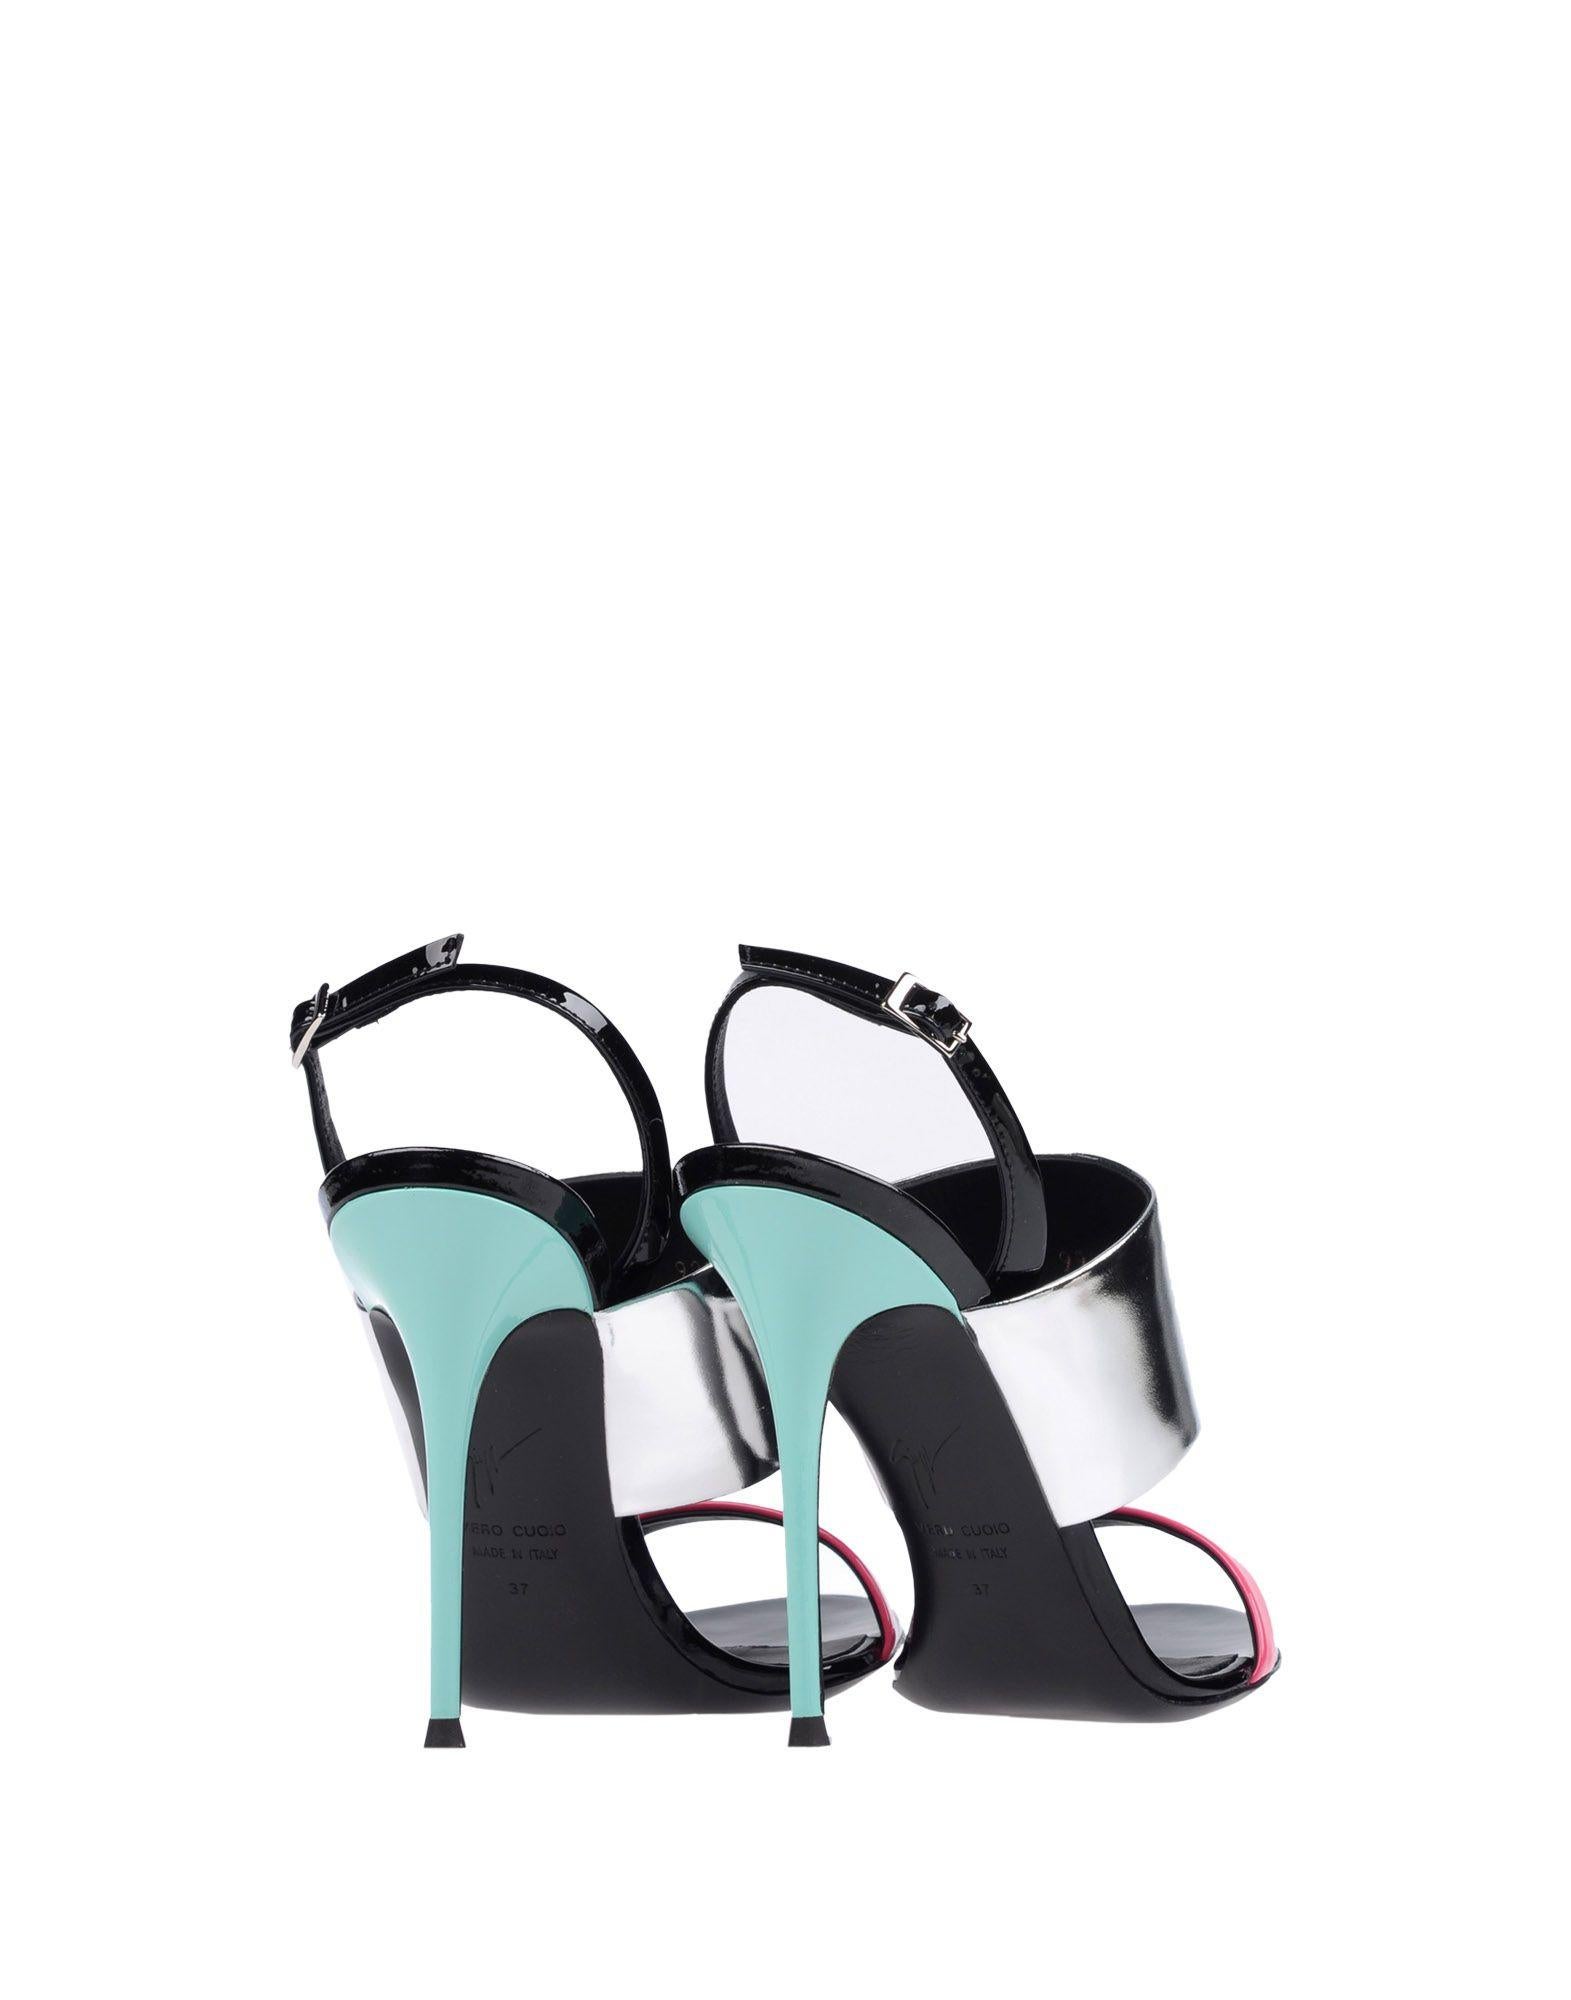 Women's Giuseppe Zanotti NEW Silver Pink Blue Leather Evening Strap Sandals Heels in Box